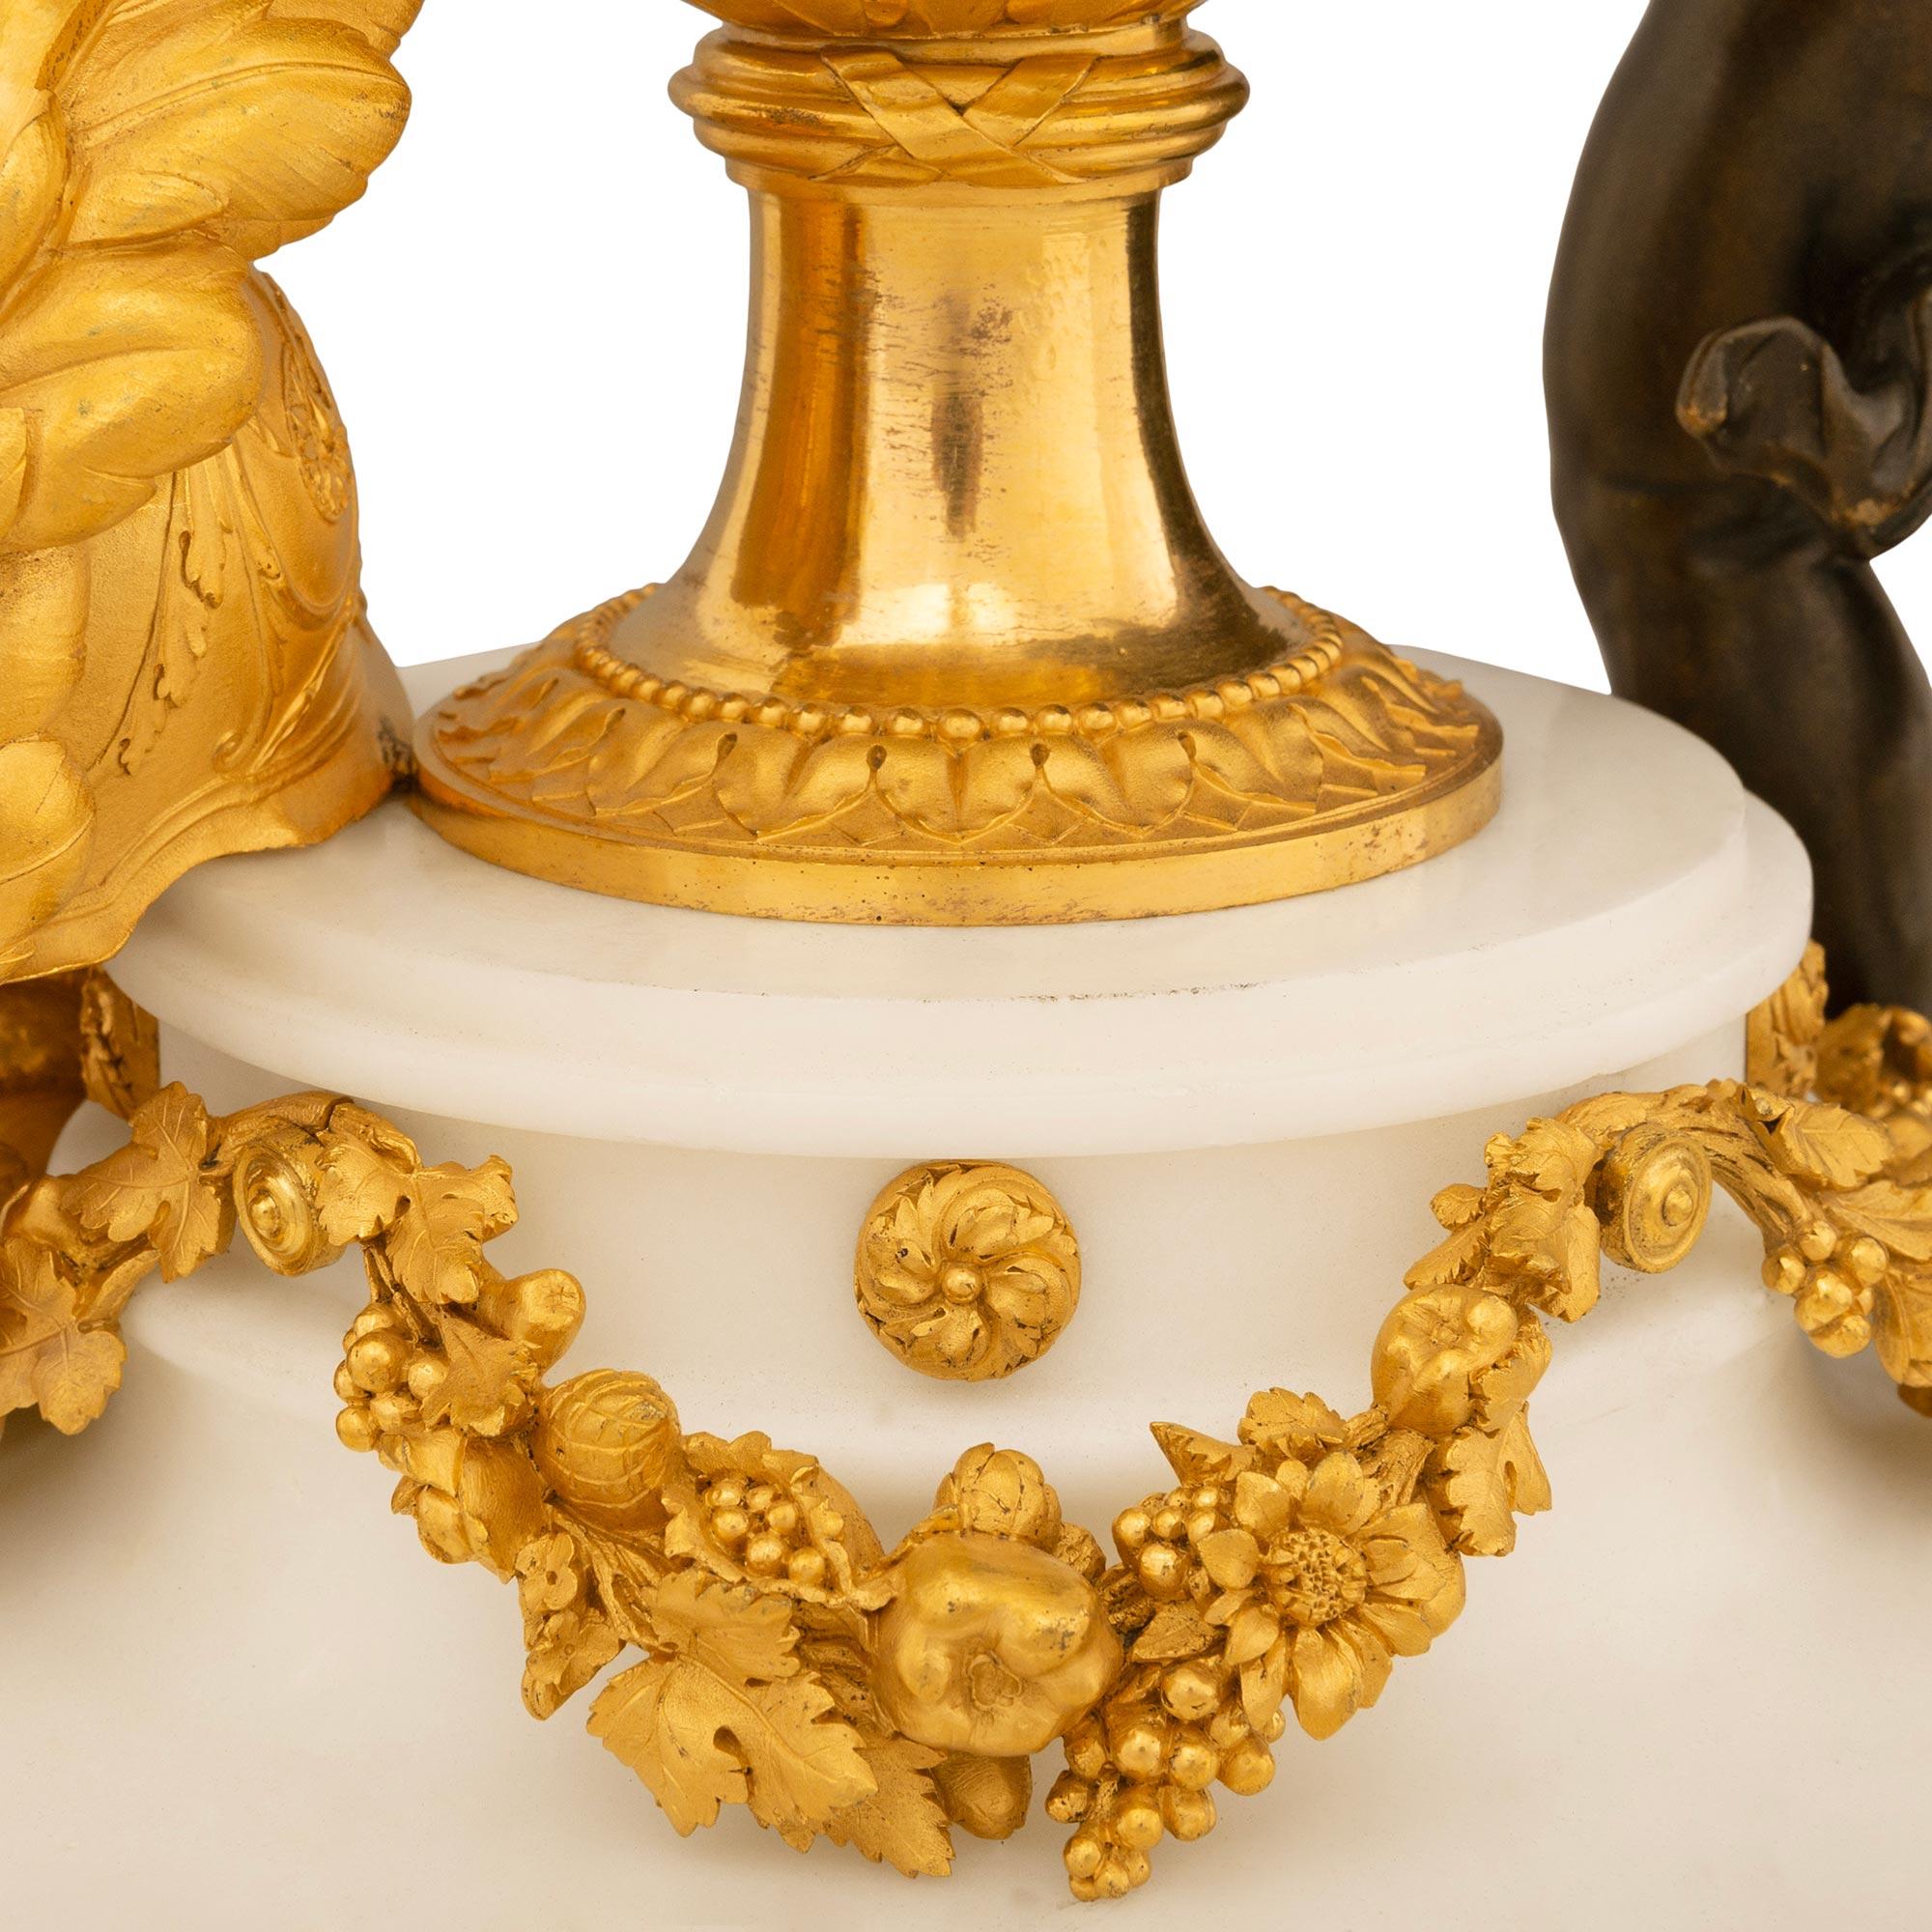 French 19th Century Neo-Classical Period Marble, Ormolu, & Bronze Clock For Sale 4